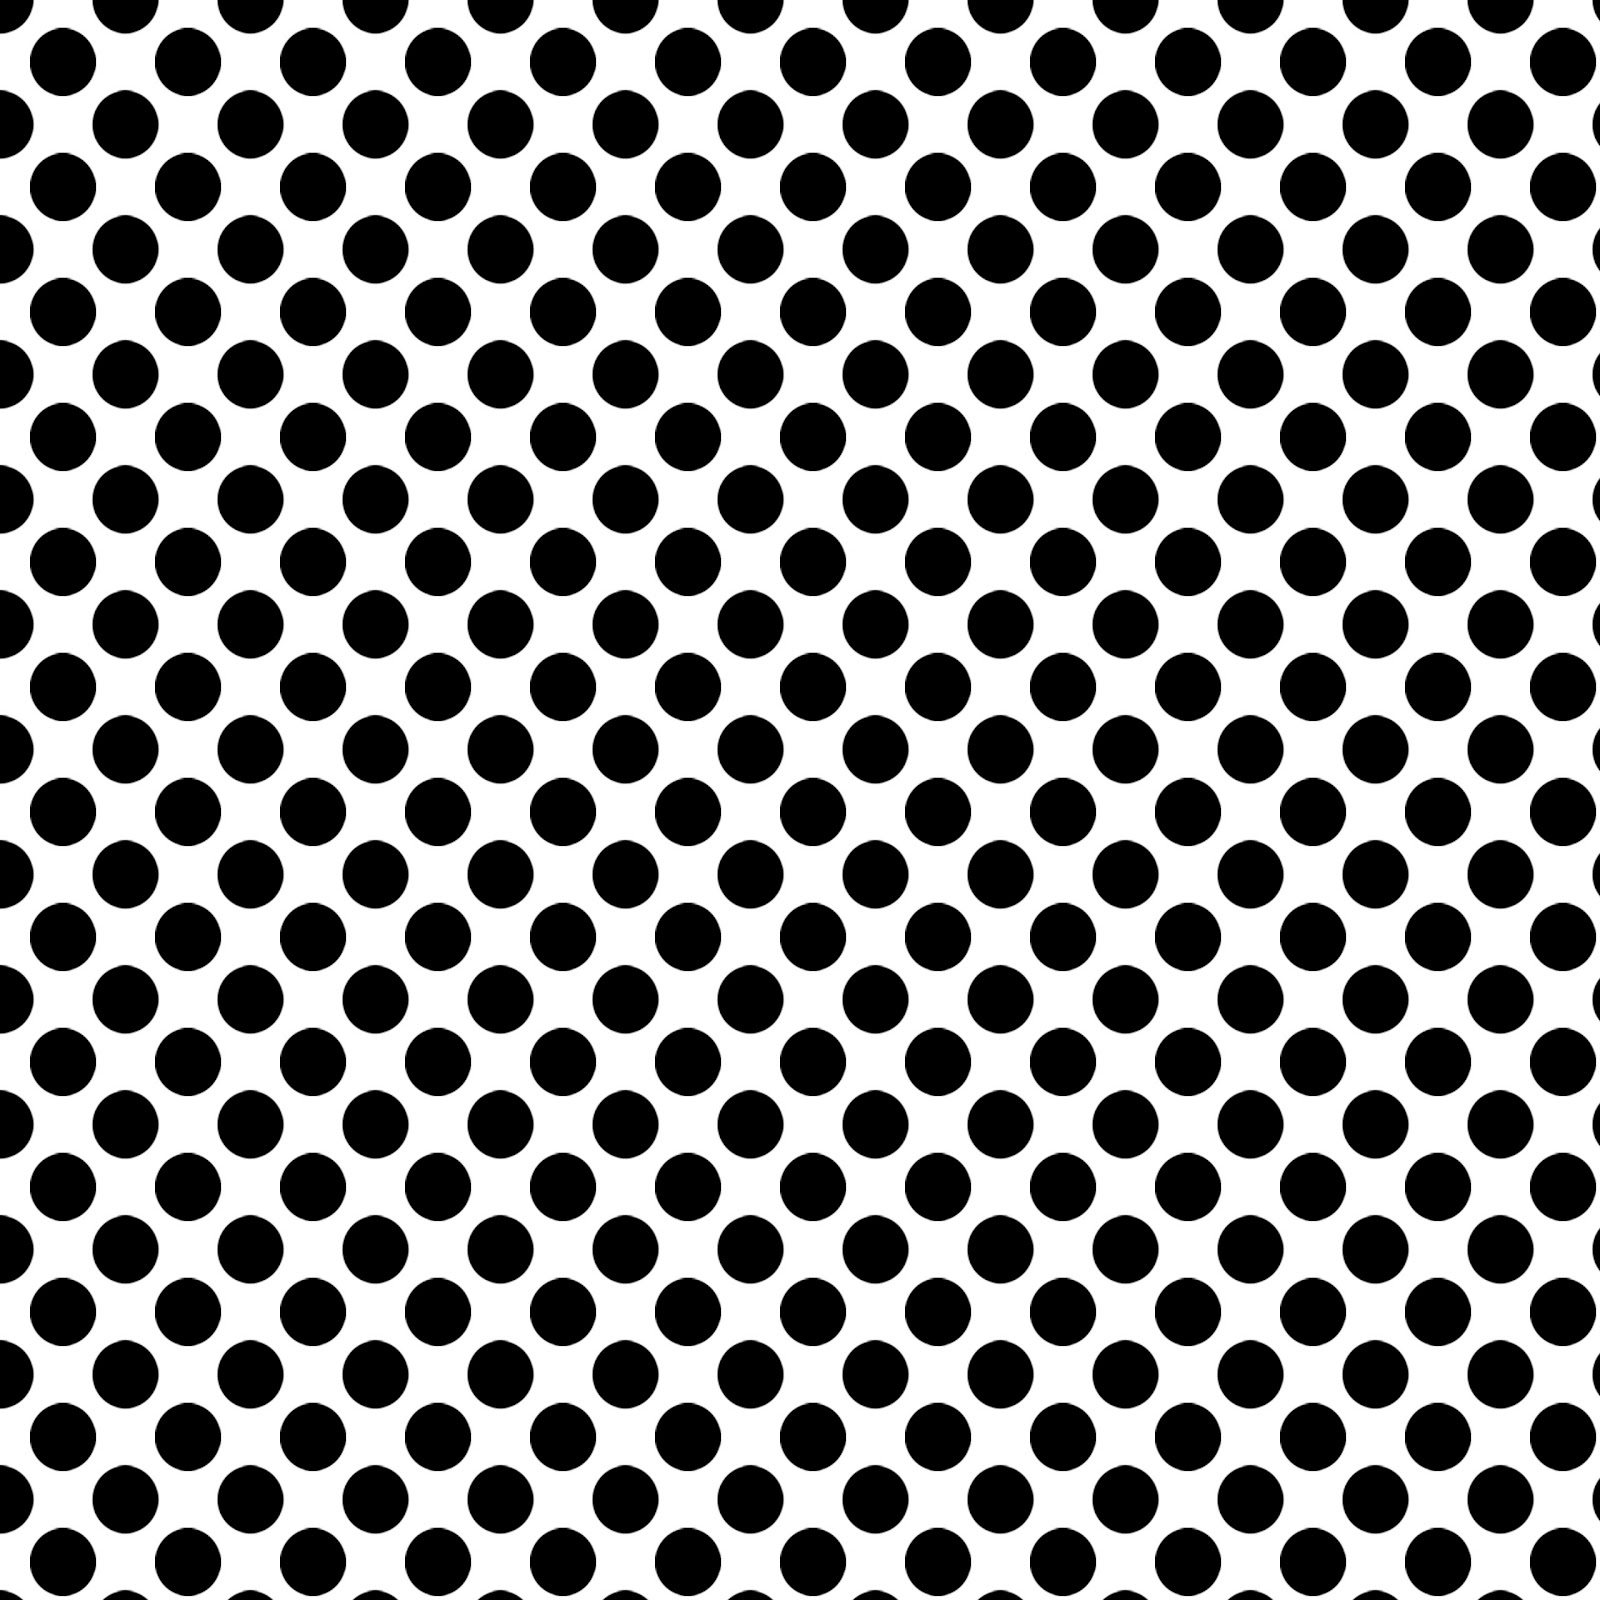 Polka Dots White With Black Graphic